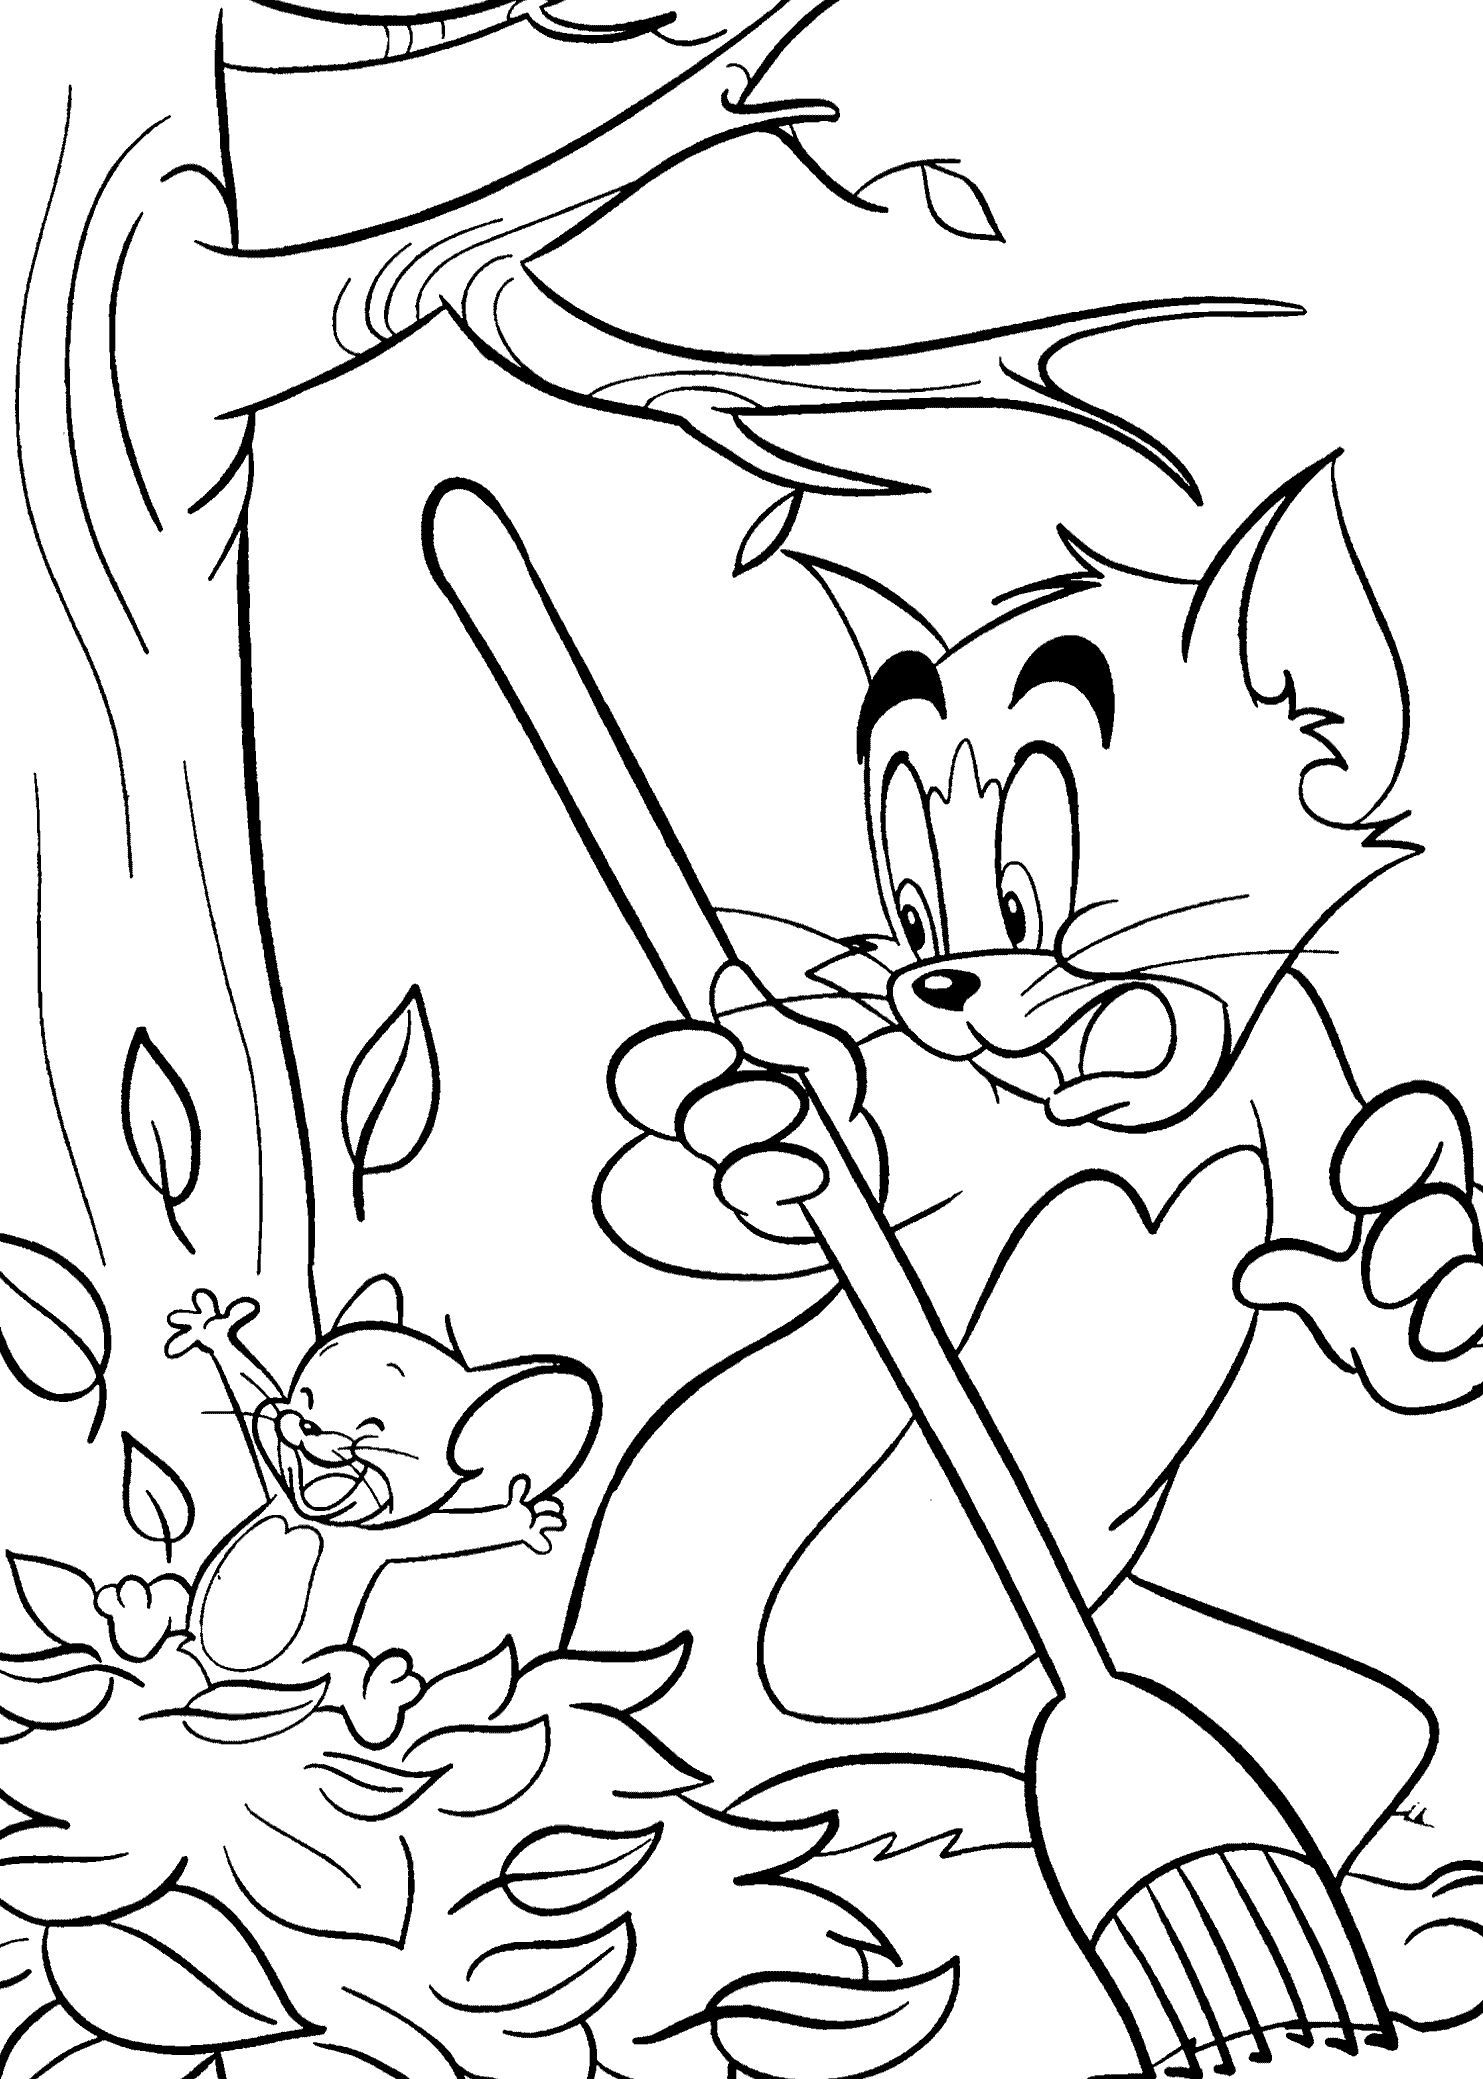 Tom Cleaning And Jerry Messing Up